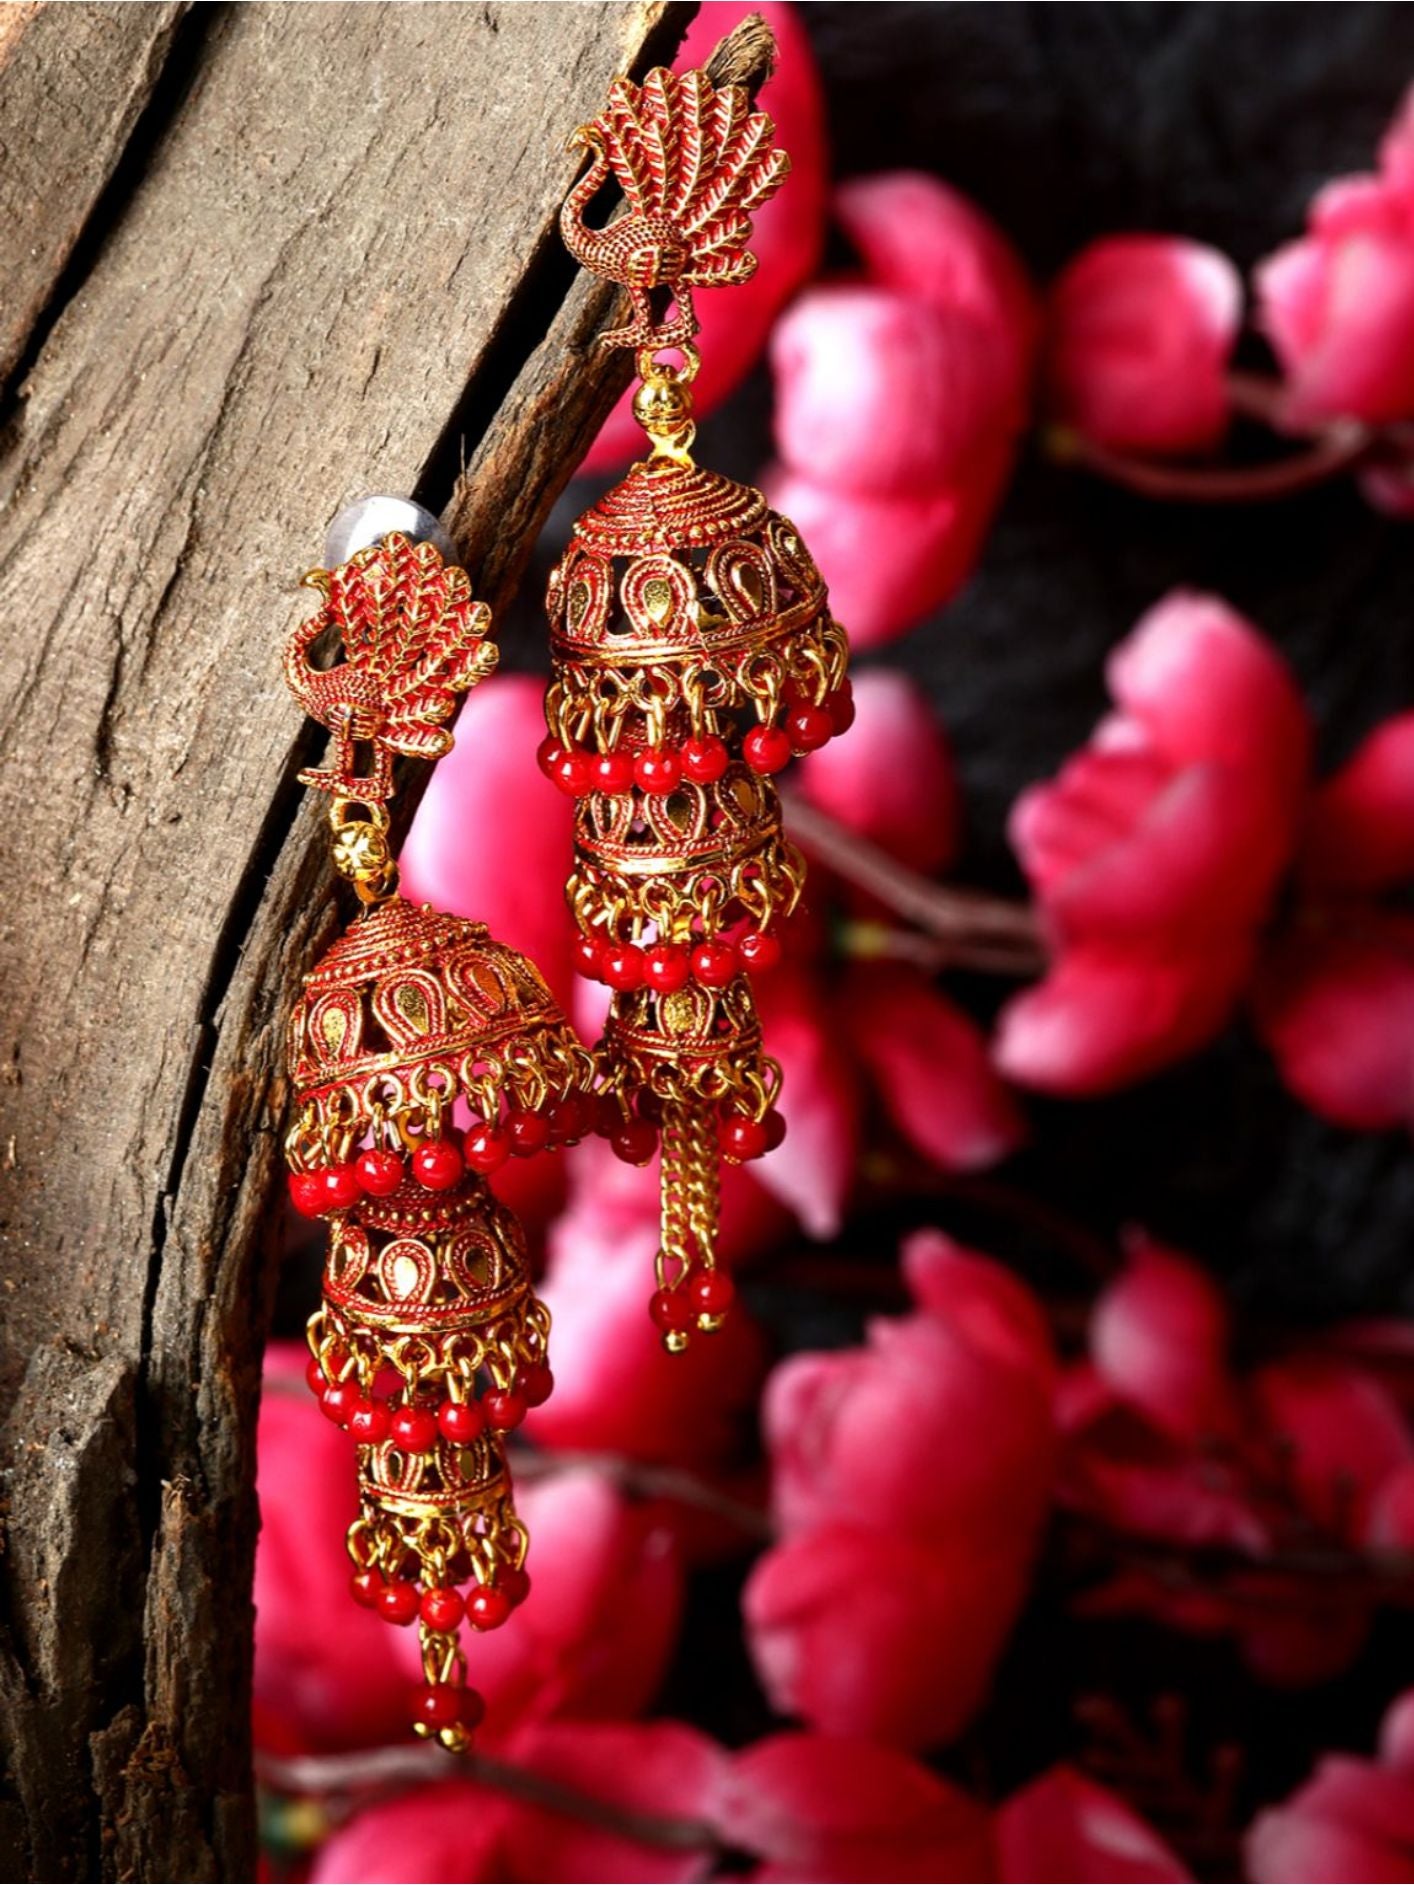 Women's Gold Plated & Red Enamelled Peacock Shaped Jhumkas - Anikas Creation